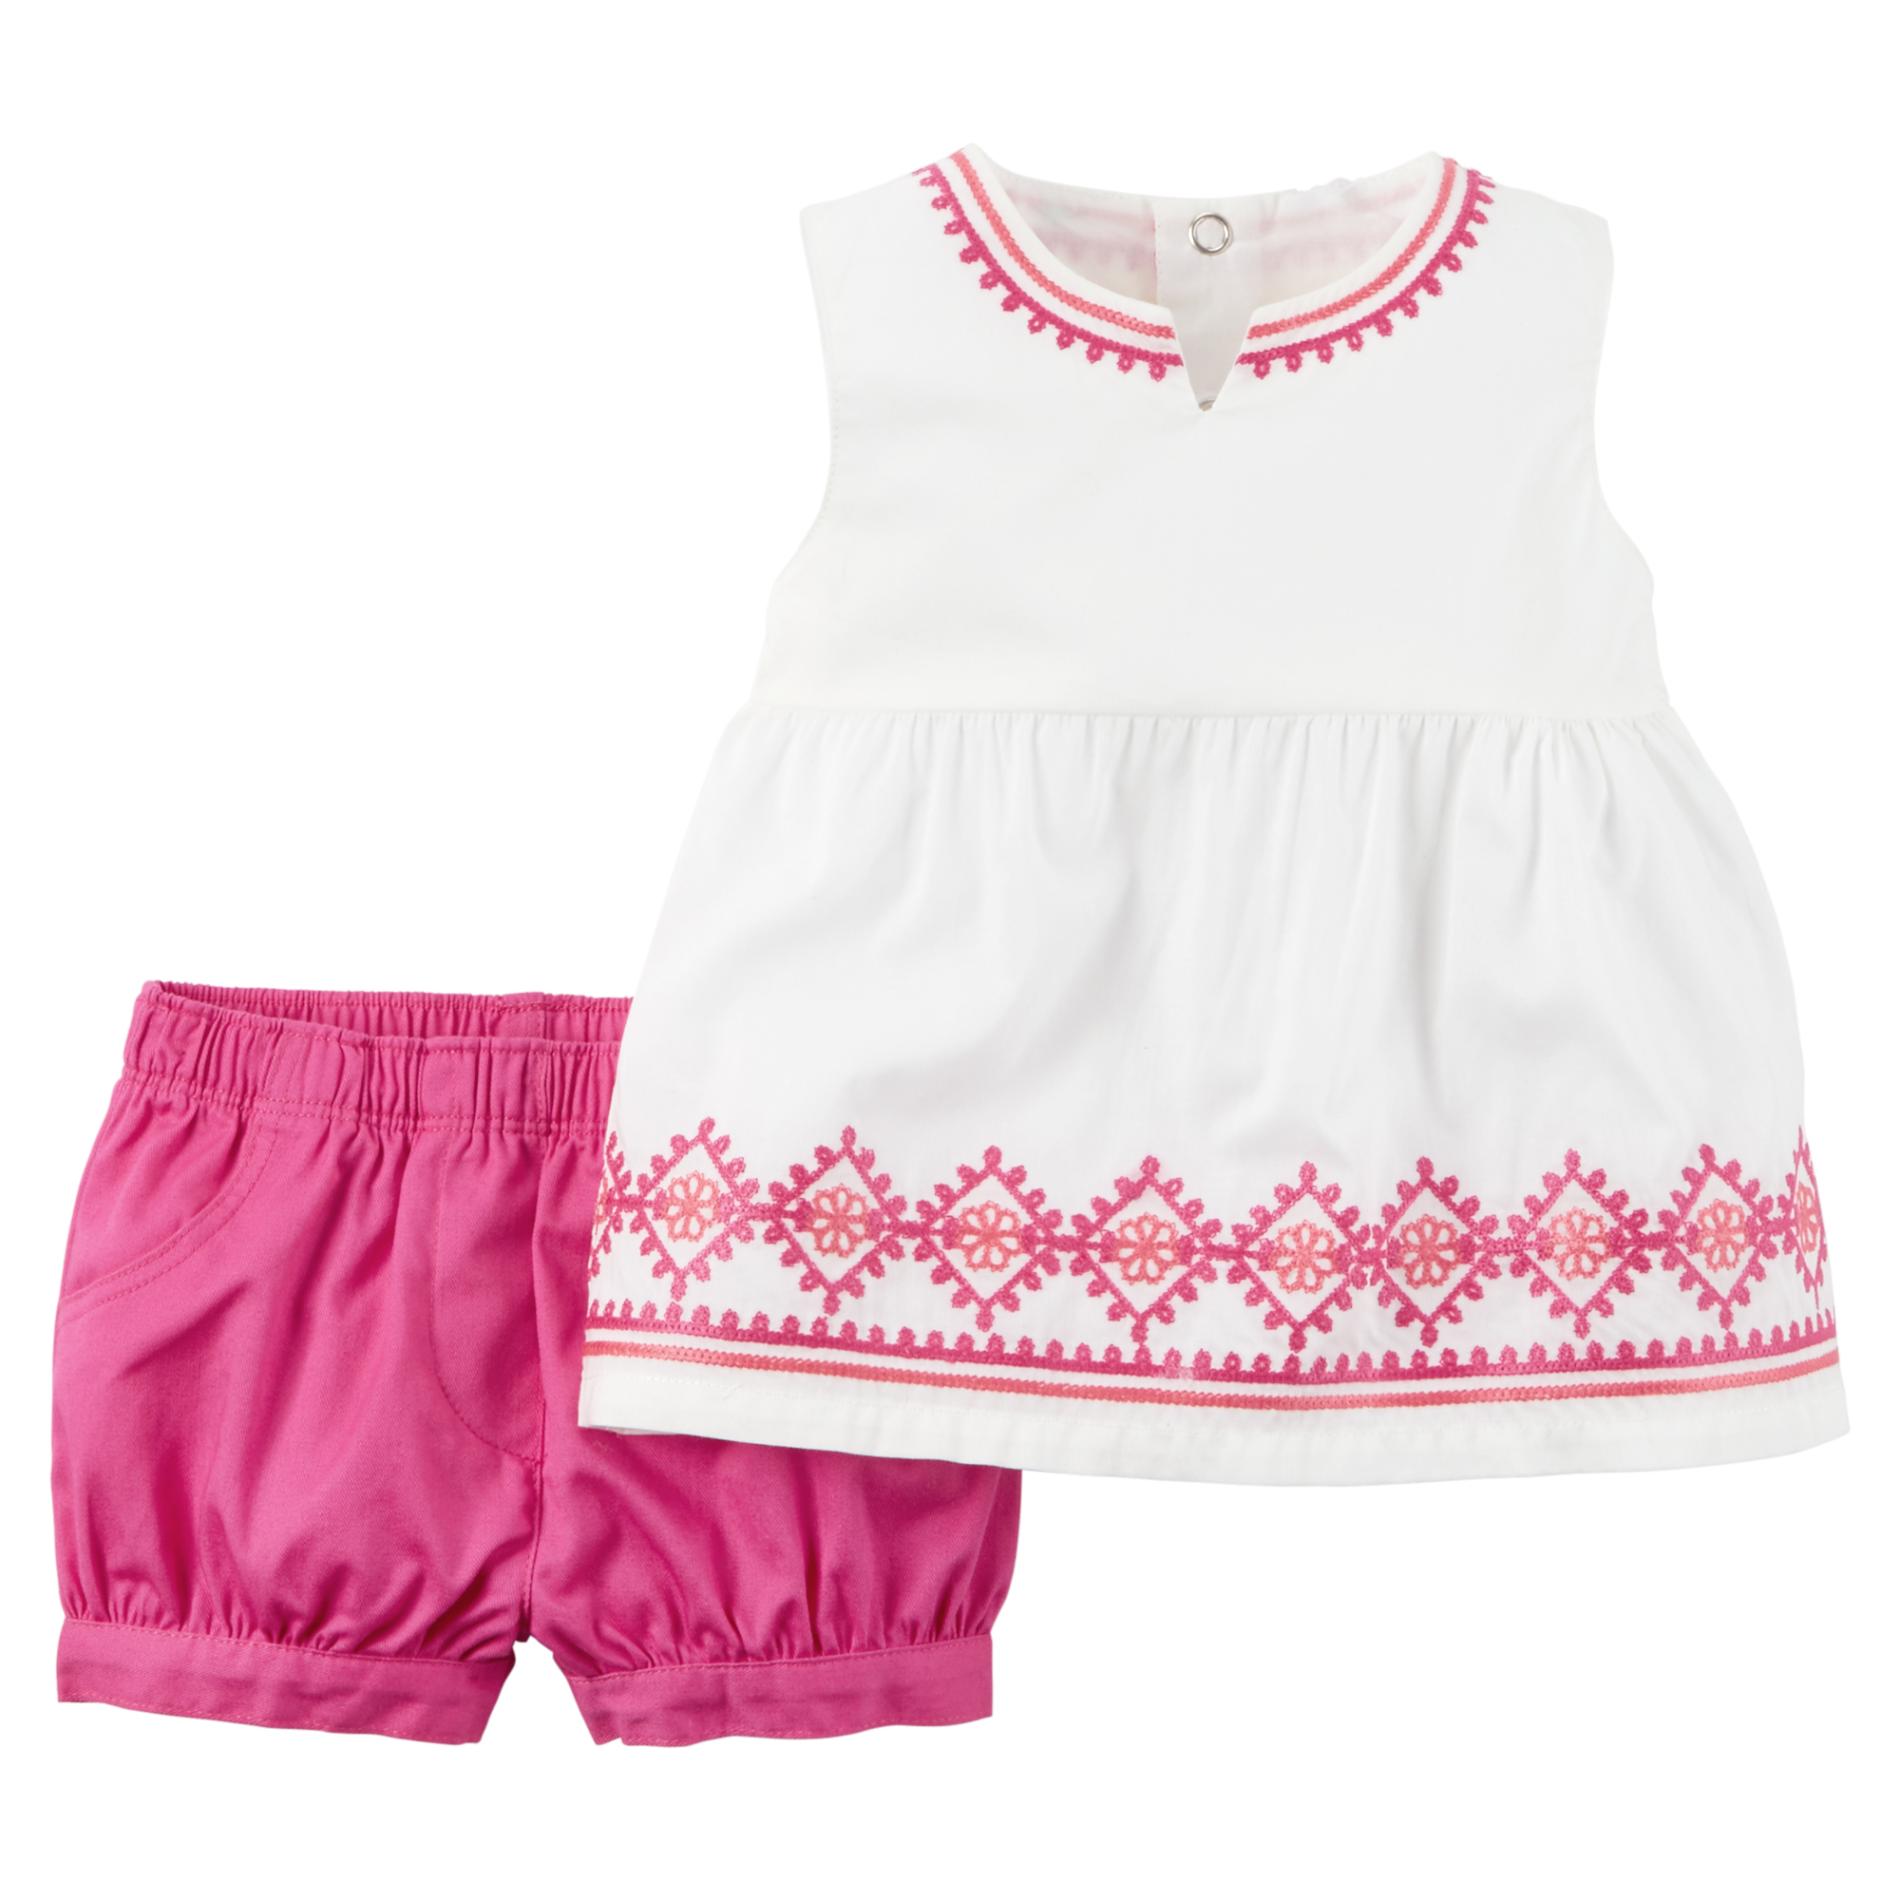 Carter's Newborn & Infant Girl's Embroidered Sleeveless Top & Shorts